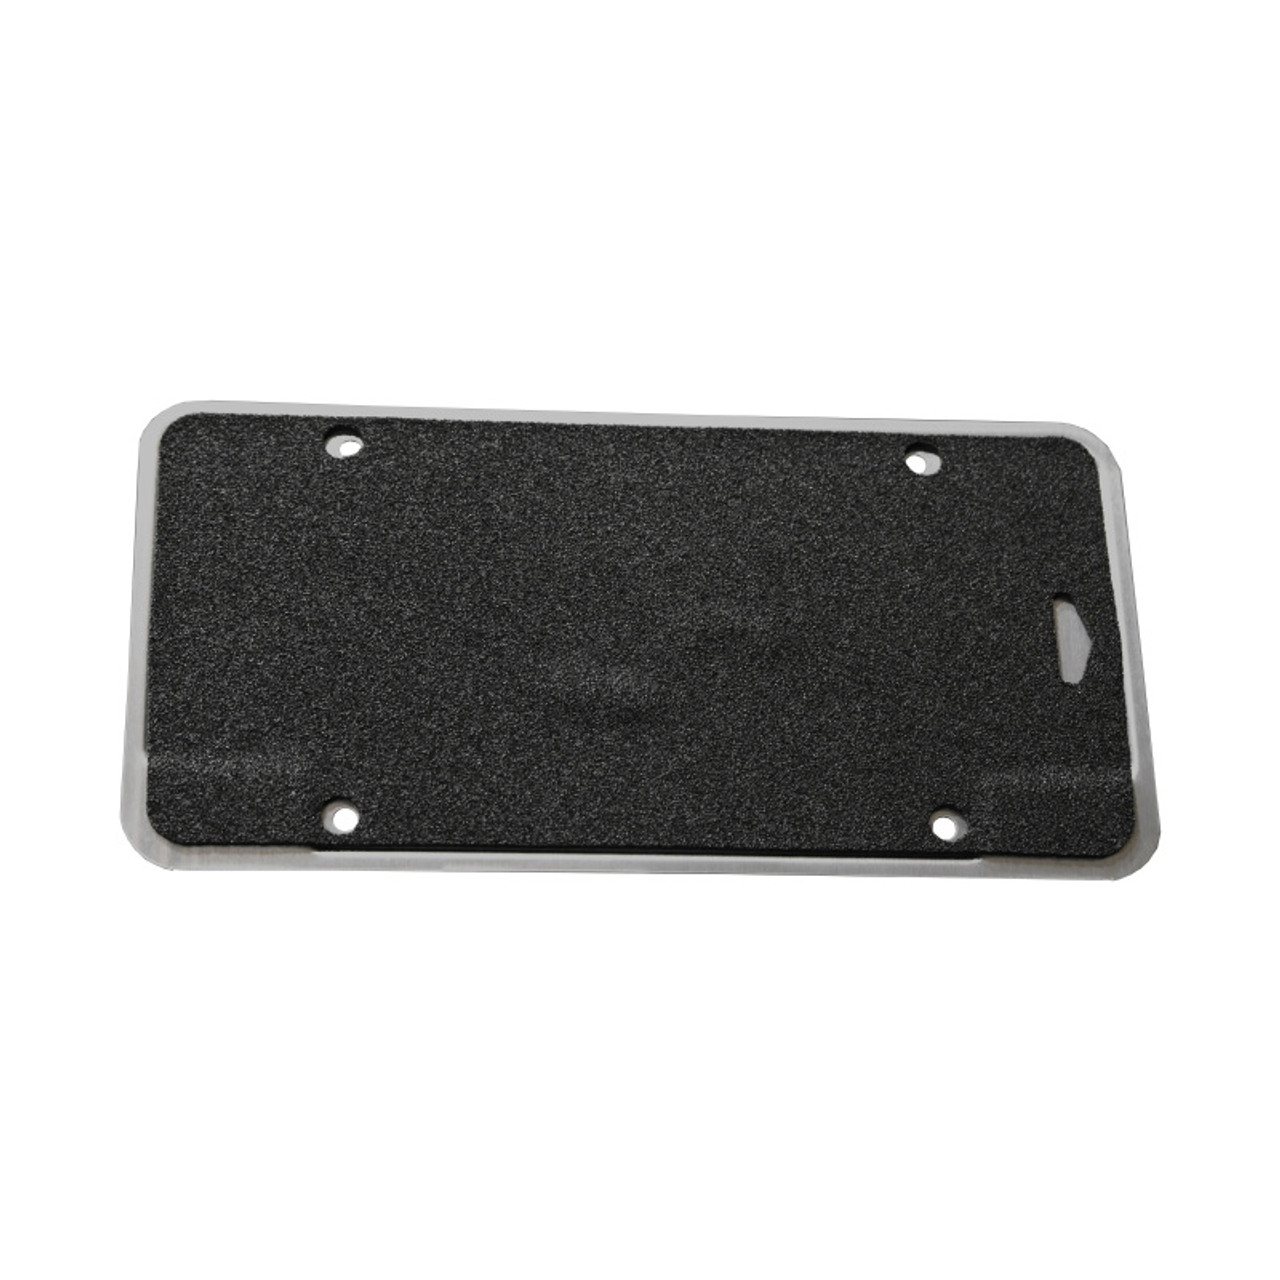 DEI License Plate Pad - 2 Pack - 50941 Photo - Mounted